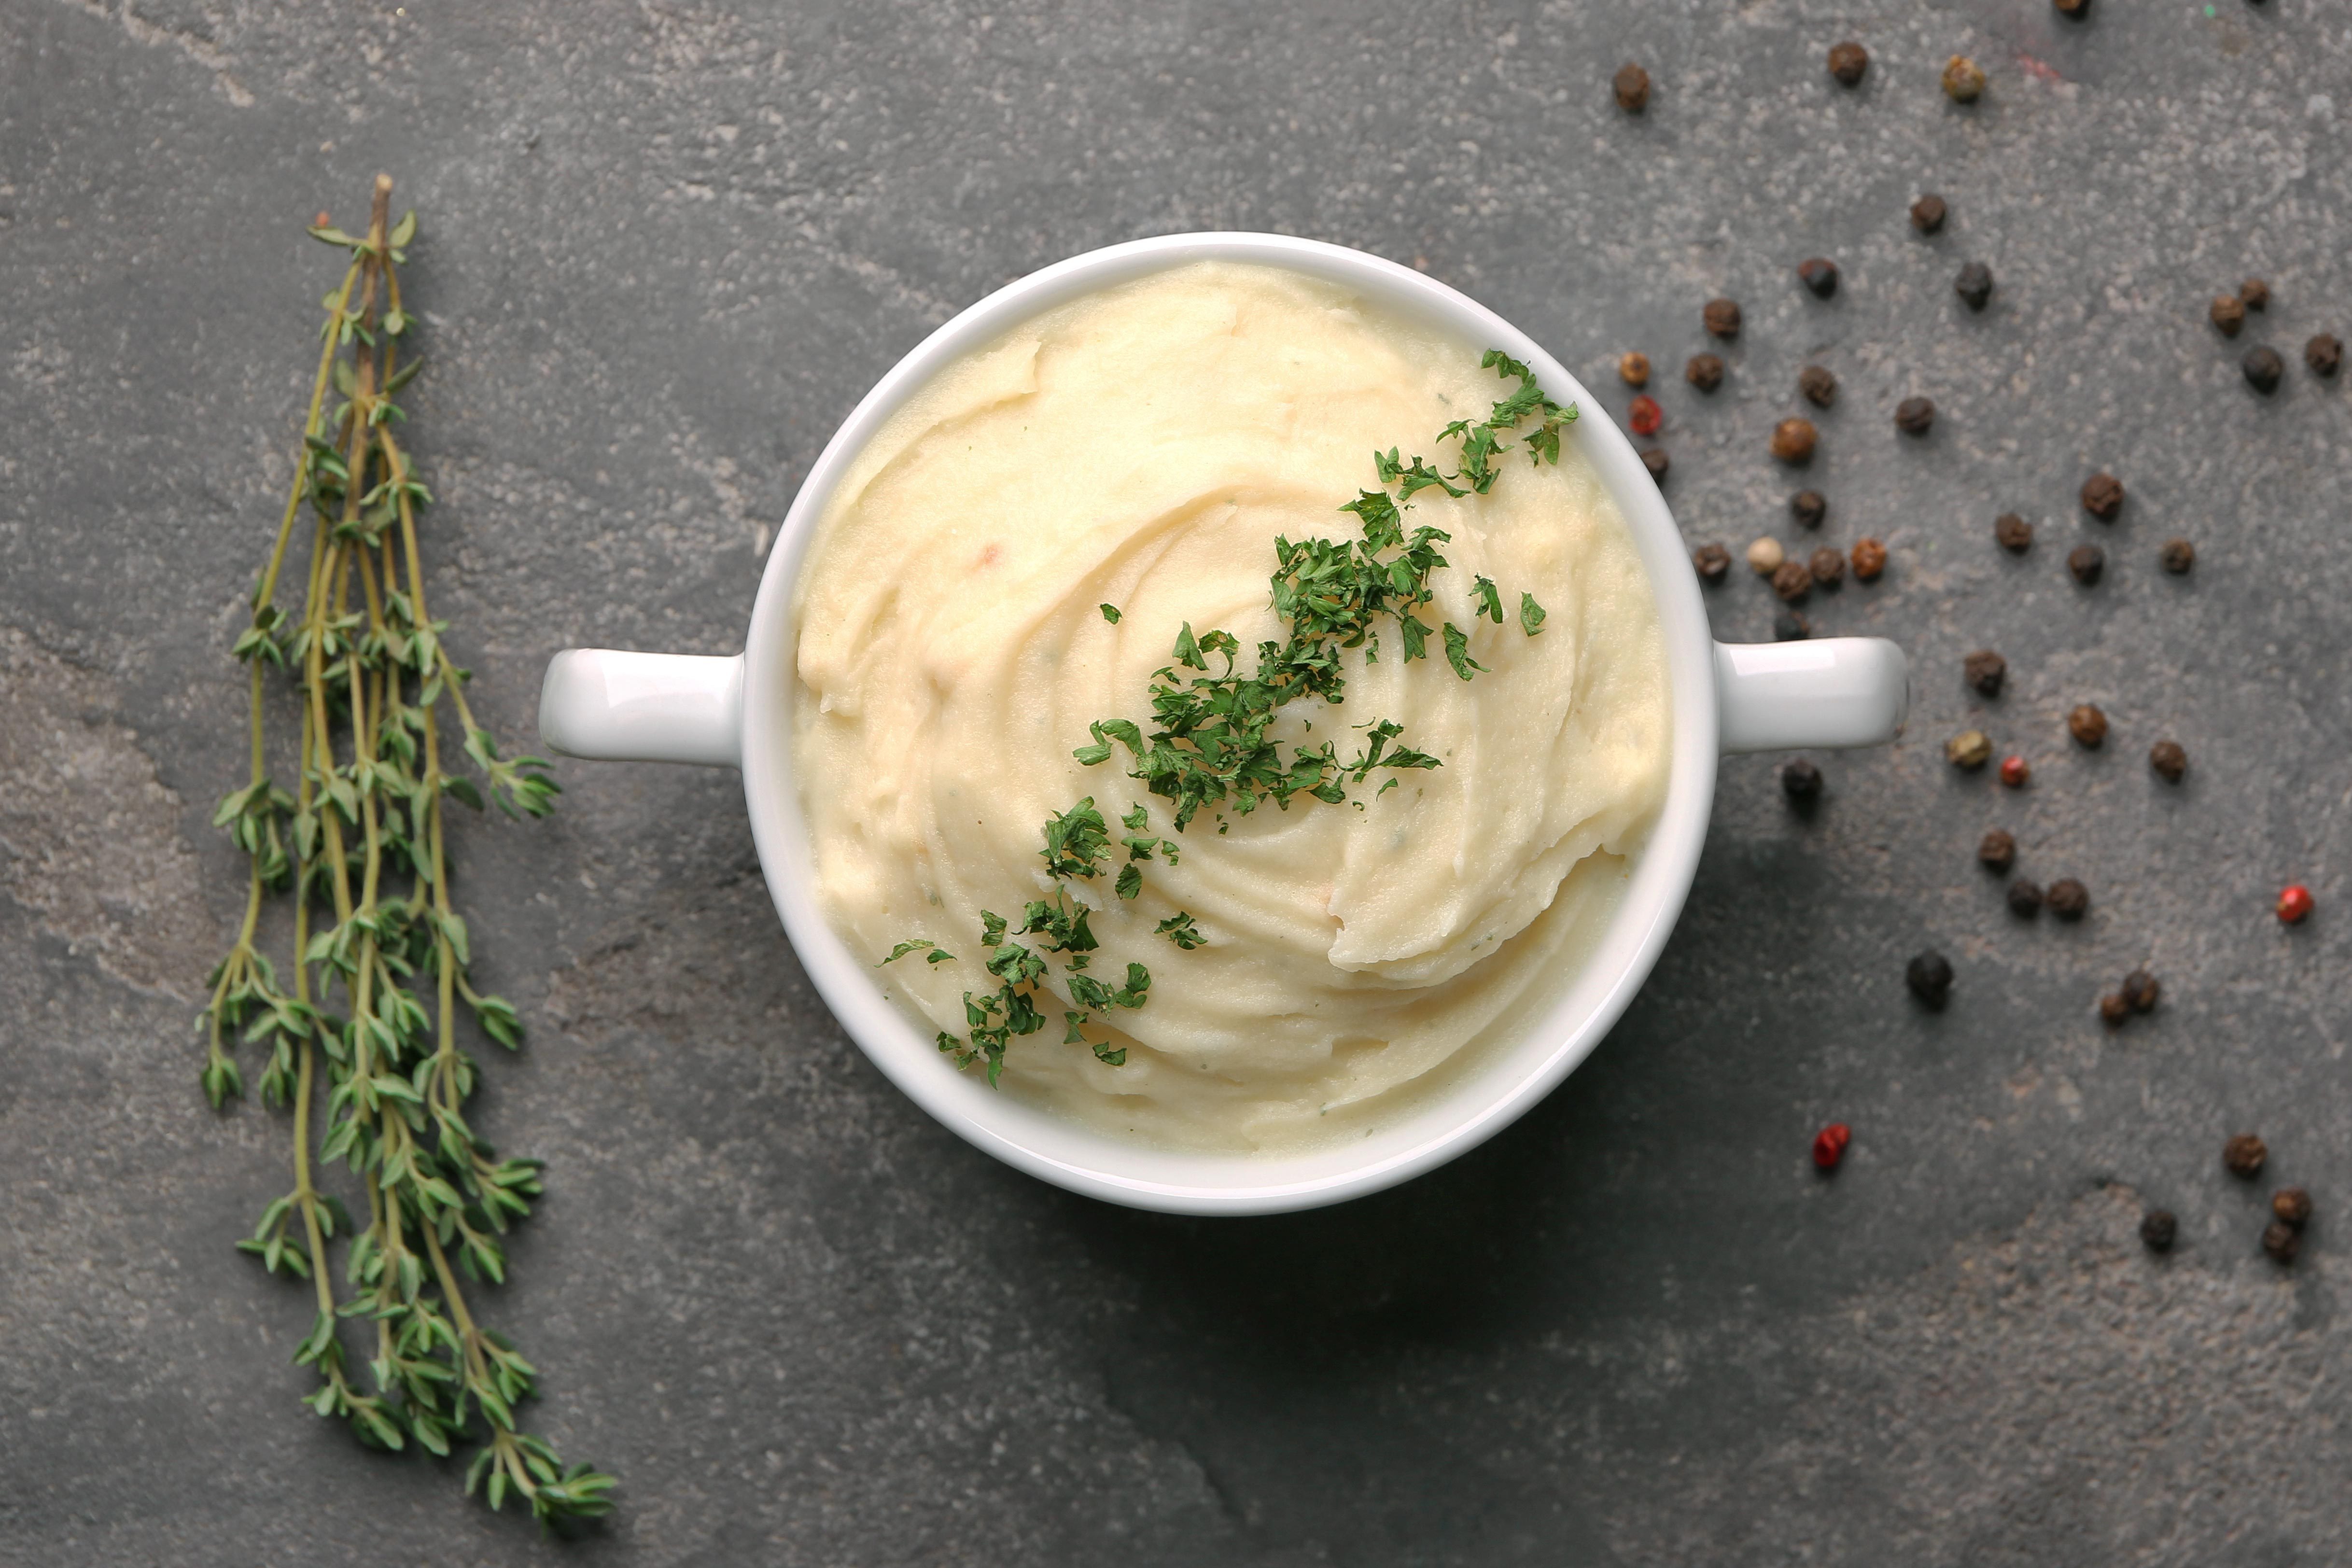 prepared meals nutritionists avoid | bowl of mashed potatoes with spices